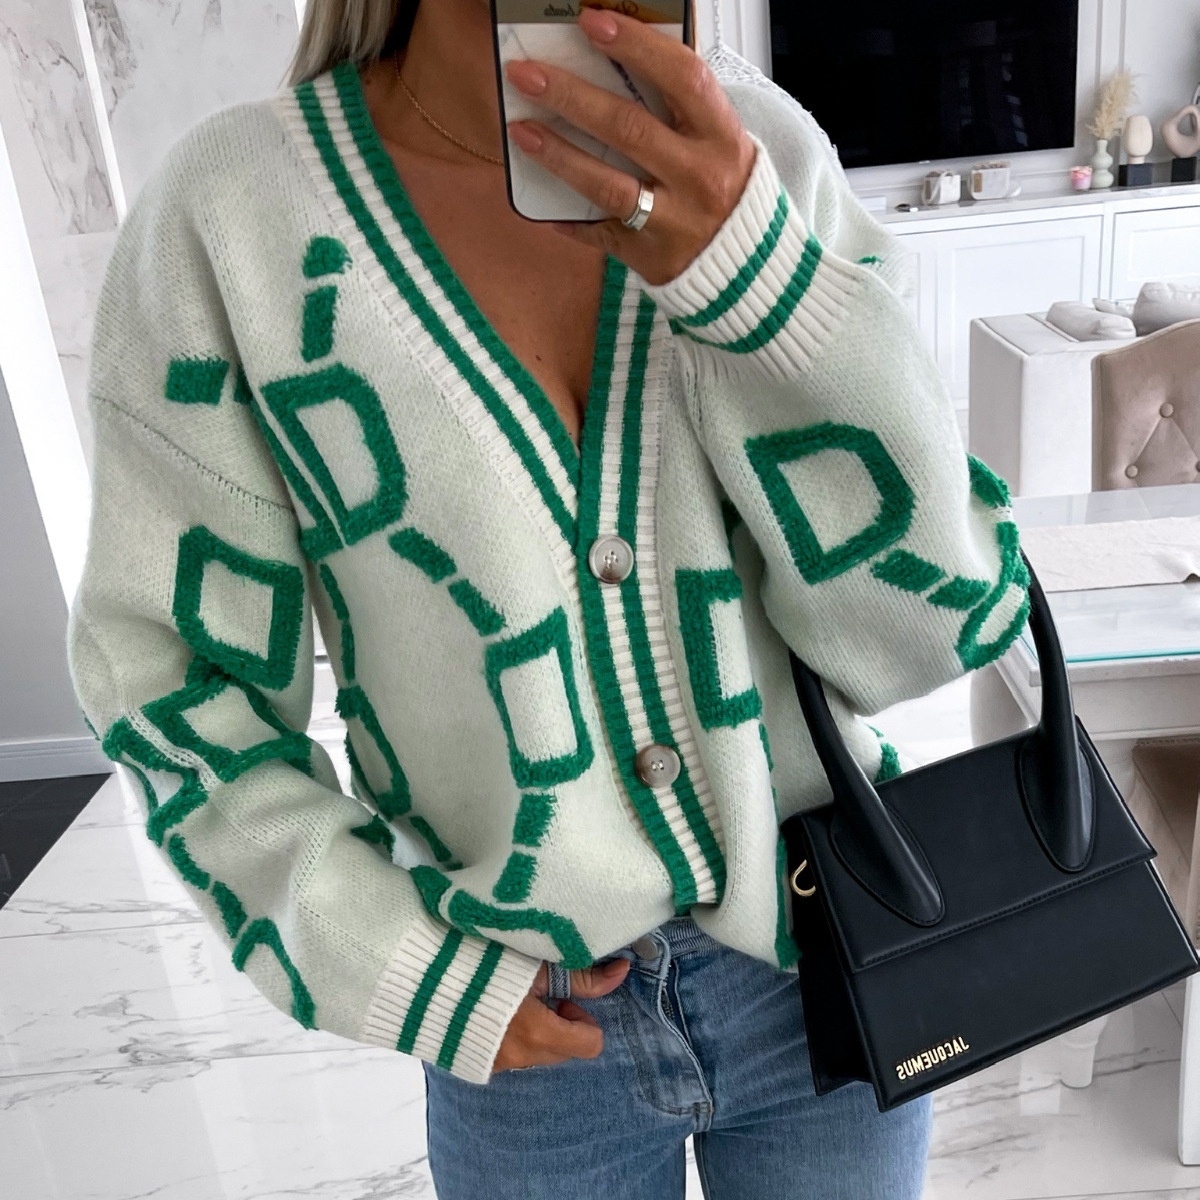 High Contrast Knit Cardigan, V-Neck Button Up Cardigan Sweater, Casual Tops For Fall & Winter, Women's Clothing - White, XXL